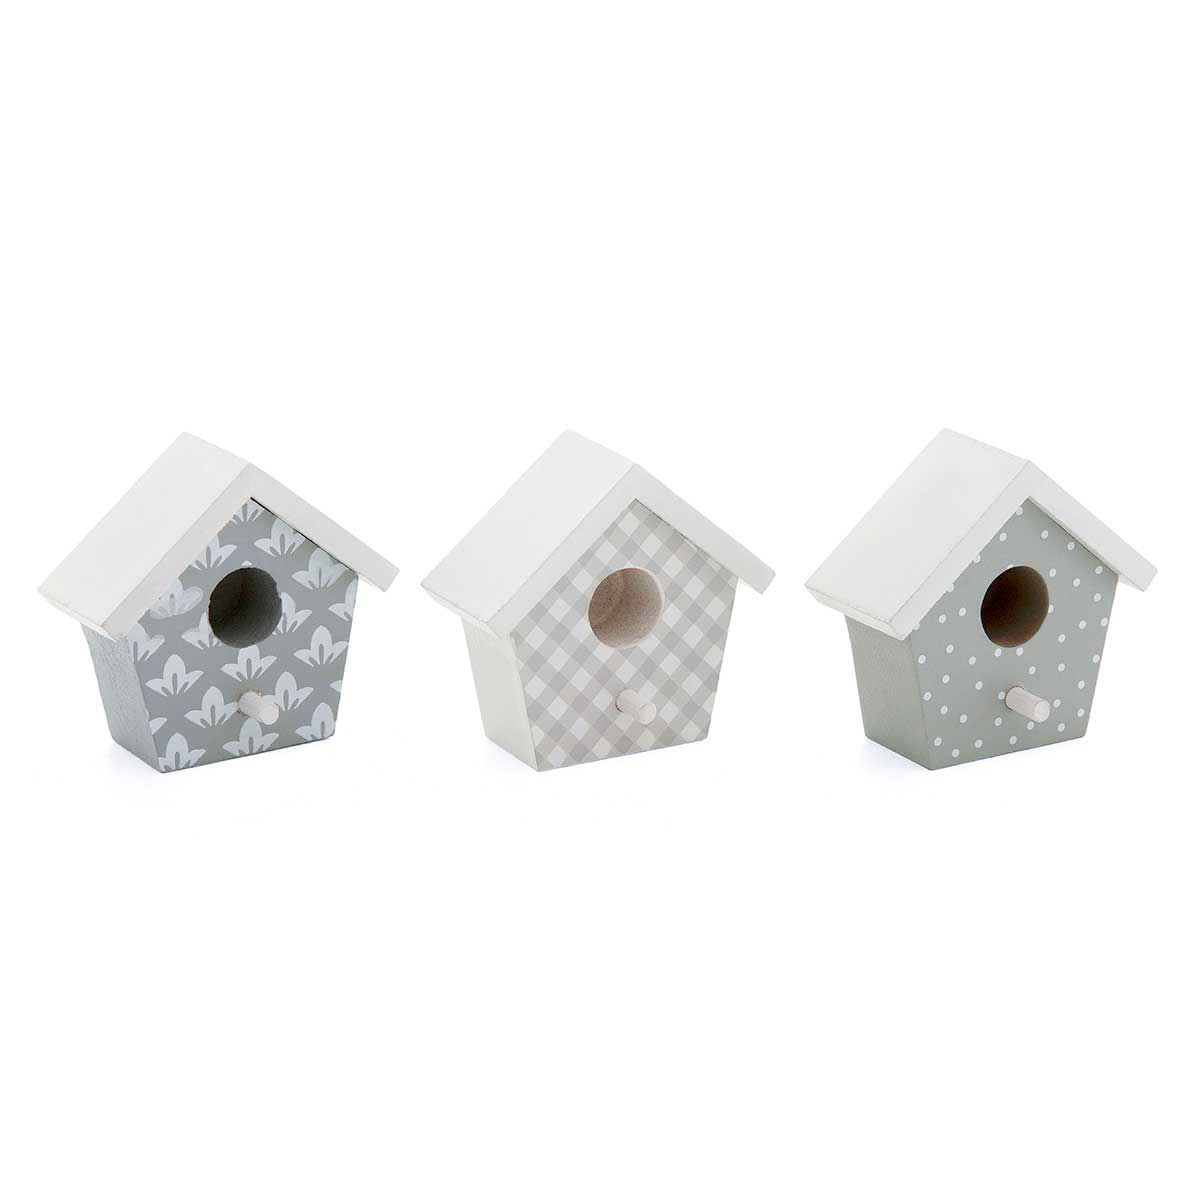 b50 MINI BIRDHOUSE 3 ASSORTED 2.25IN X 1.25IN X 2.25IN WOOD - Click Image to Close